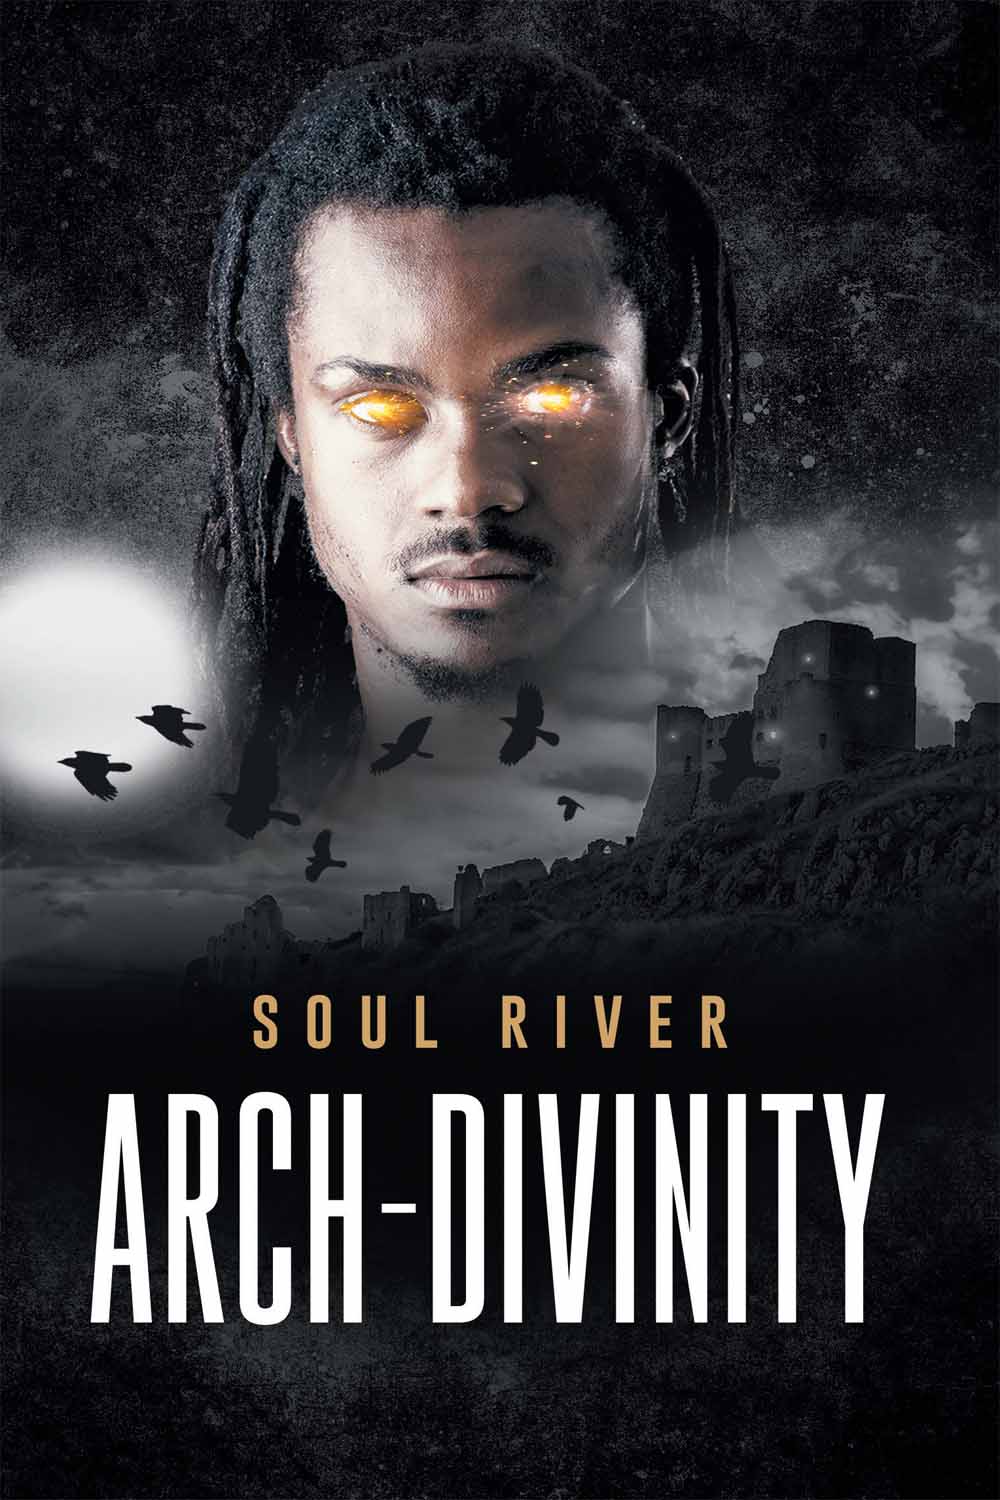 Arch-Divinity by Soul River